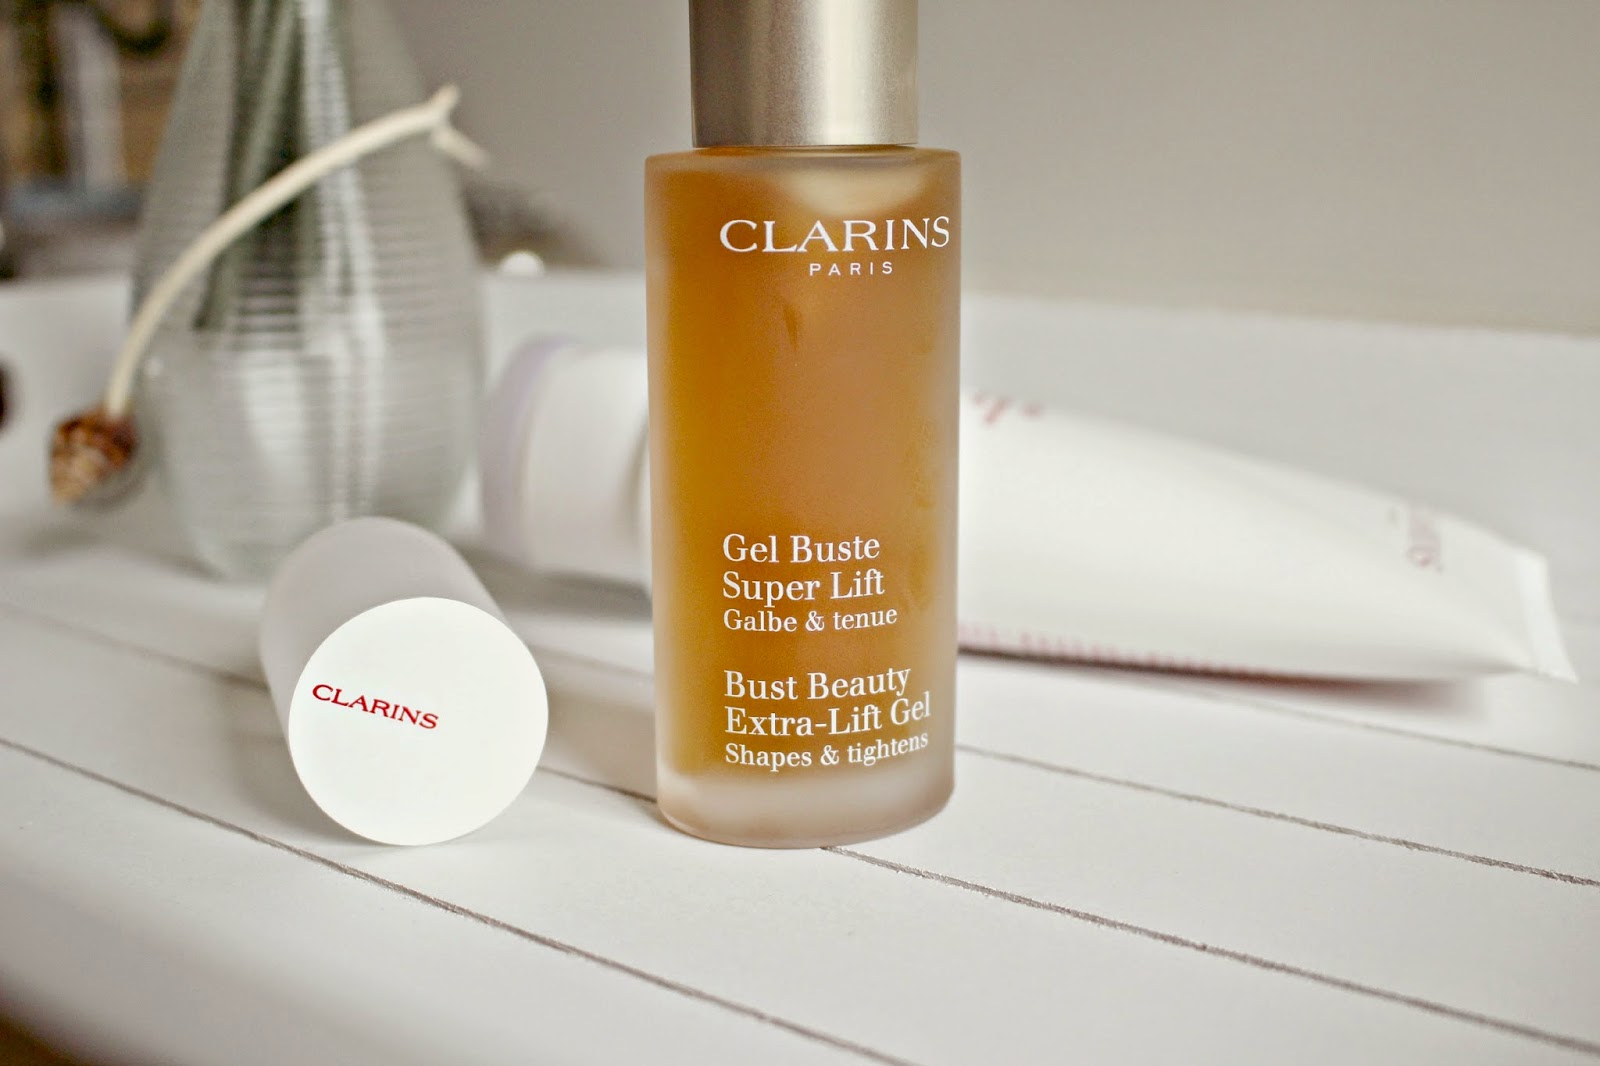 Bust Body firming with Clarins! - Fashion Mumblr